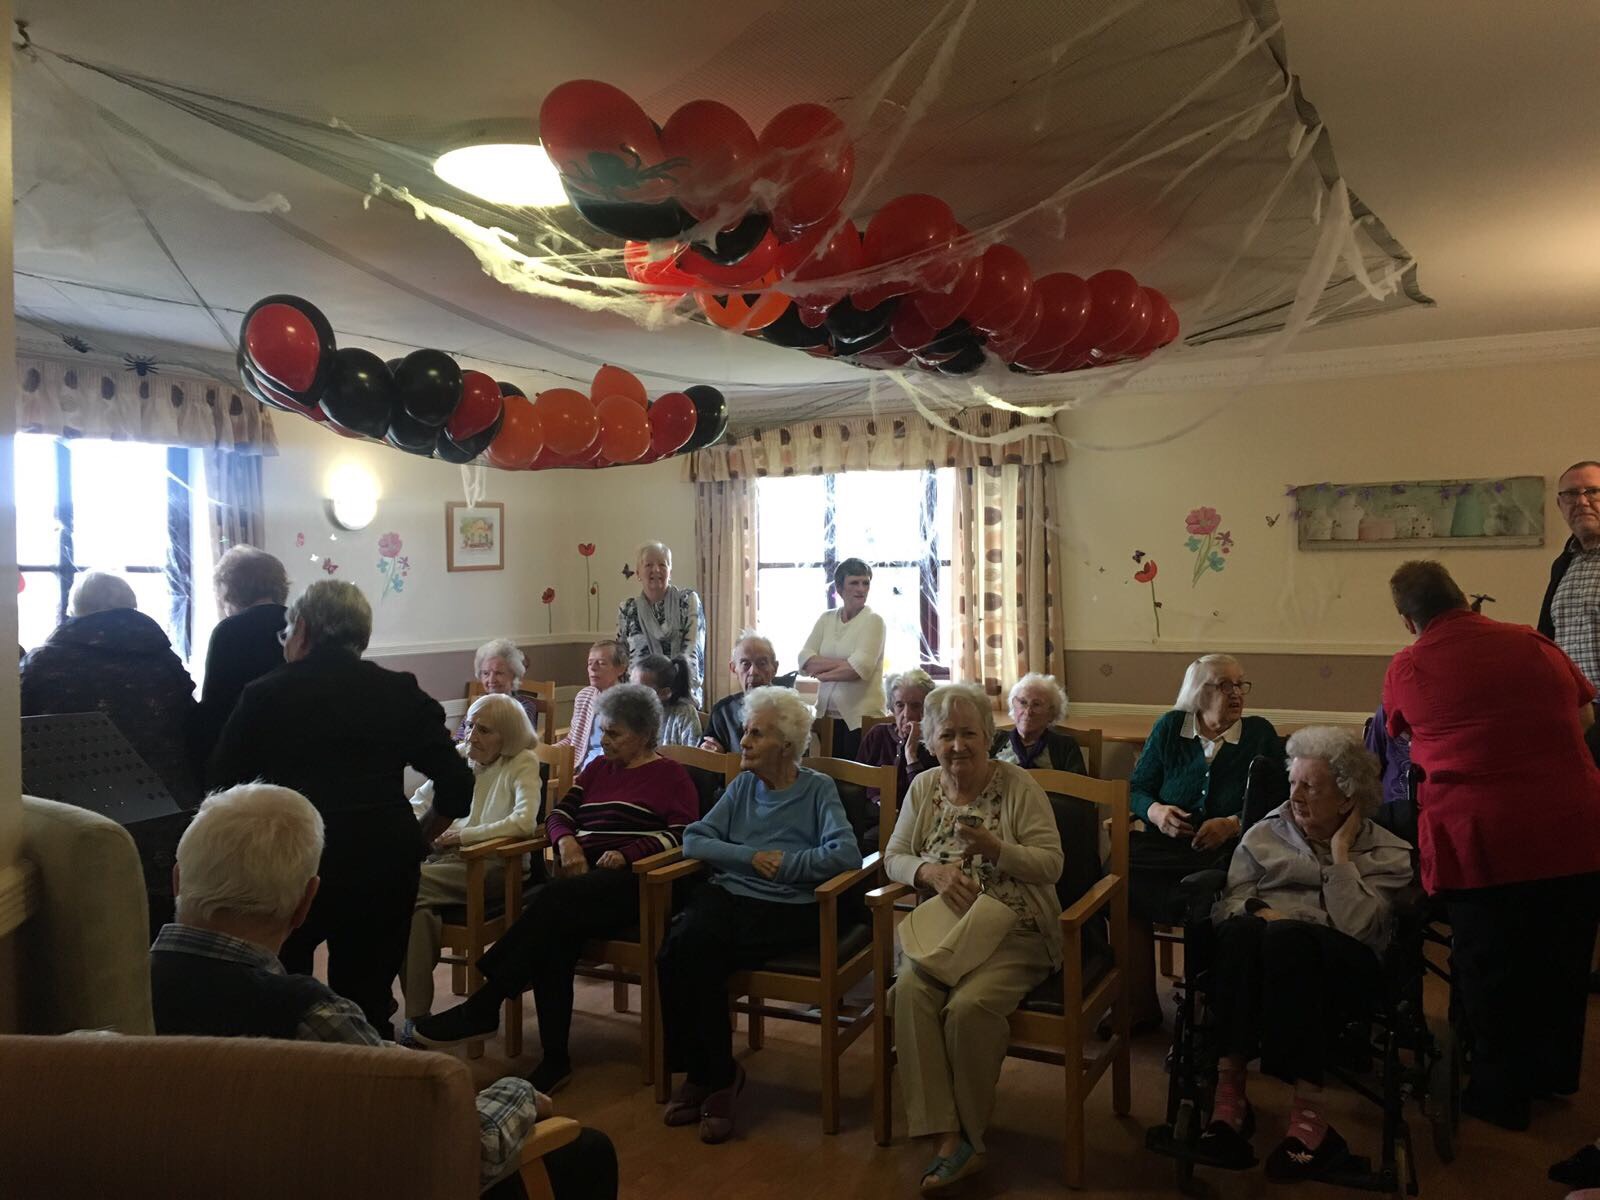 Elizabeth Court Care Centre Halloween Party 2017: Key Healthcare is dedicated to caring for elderly residents in safe. We have multiple dementia care homes including our care home middlesbrough, our care home St. Helen and care home saltburn. We excel in monitoring and improving care levels.